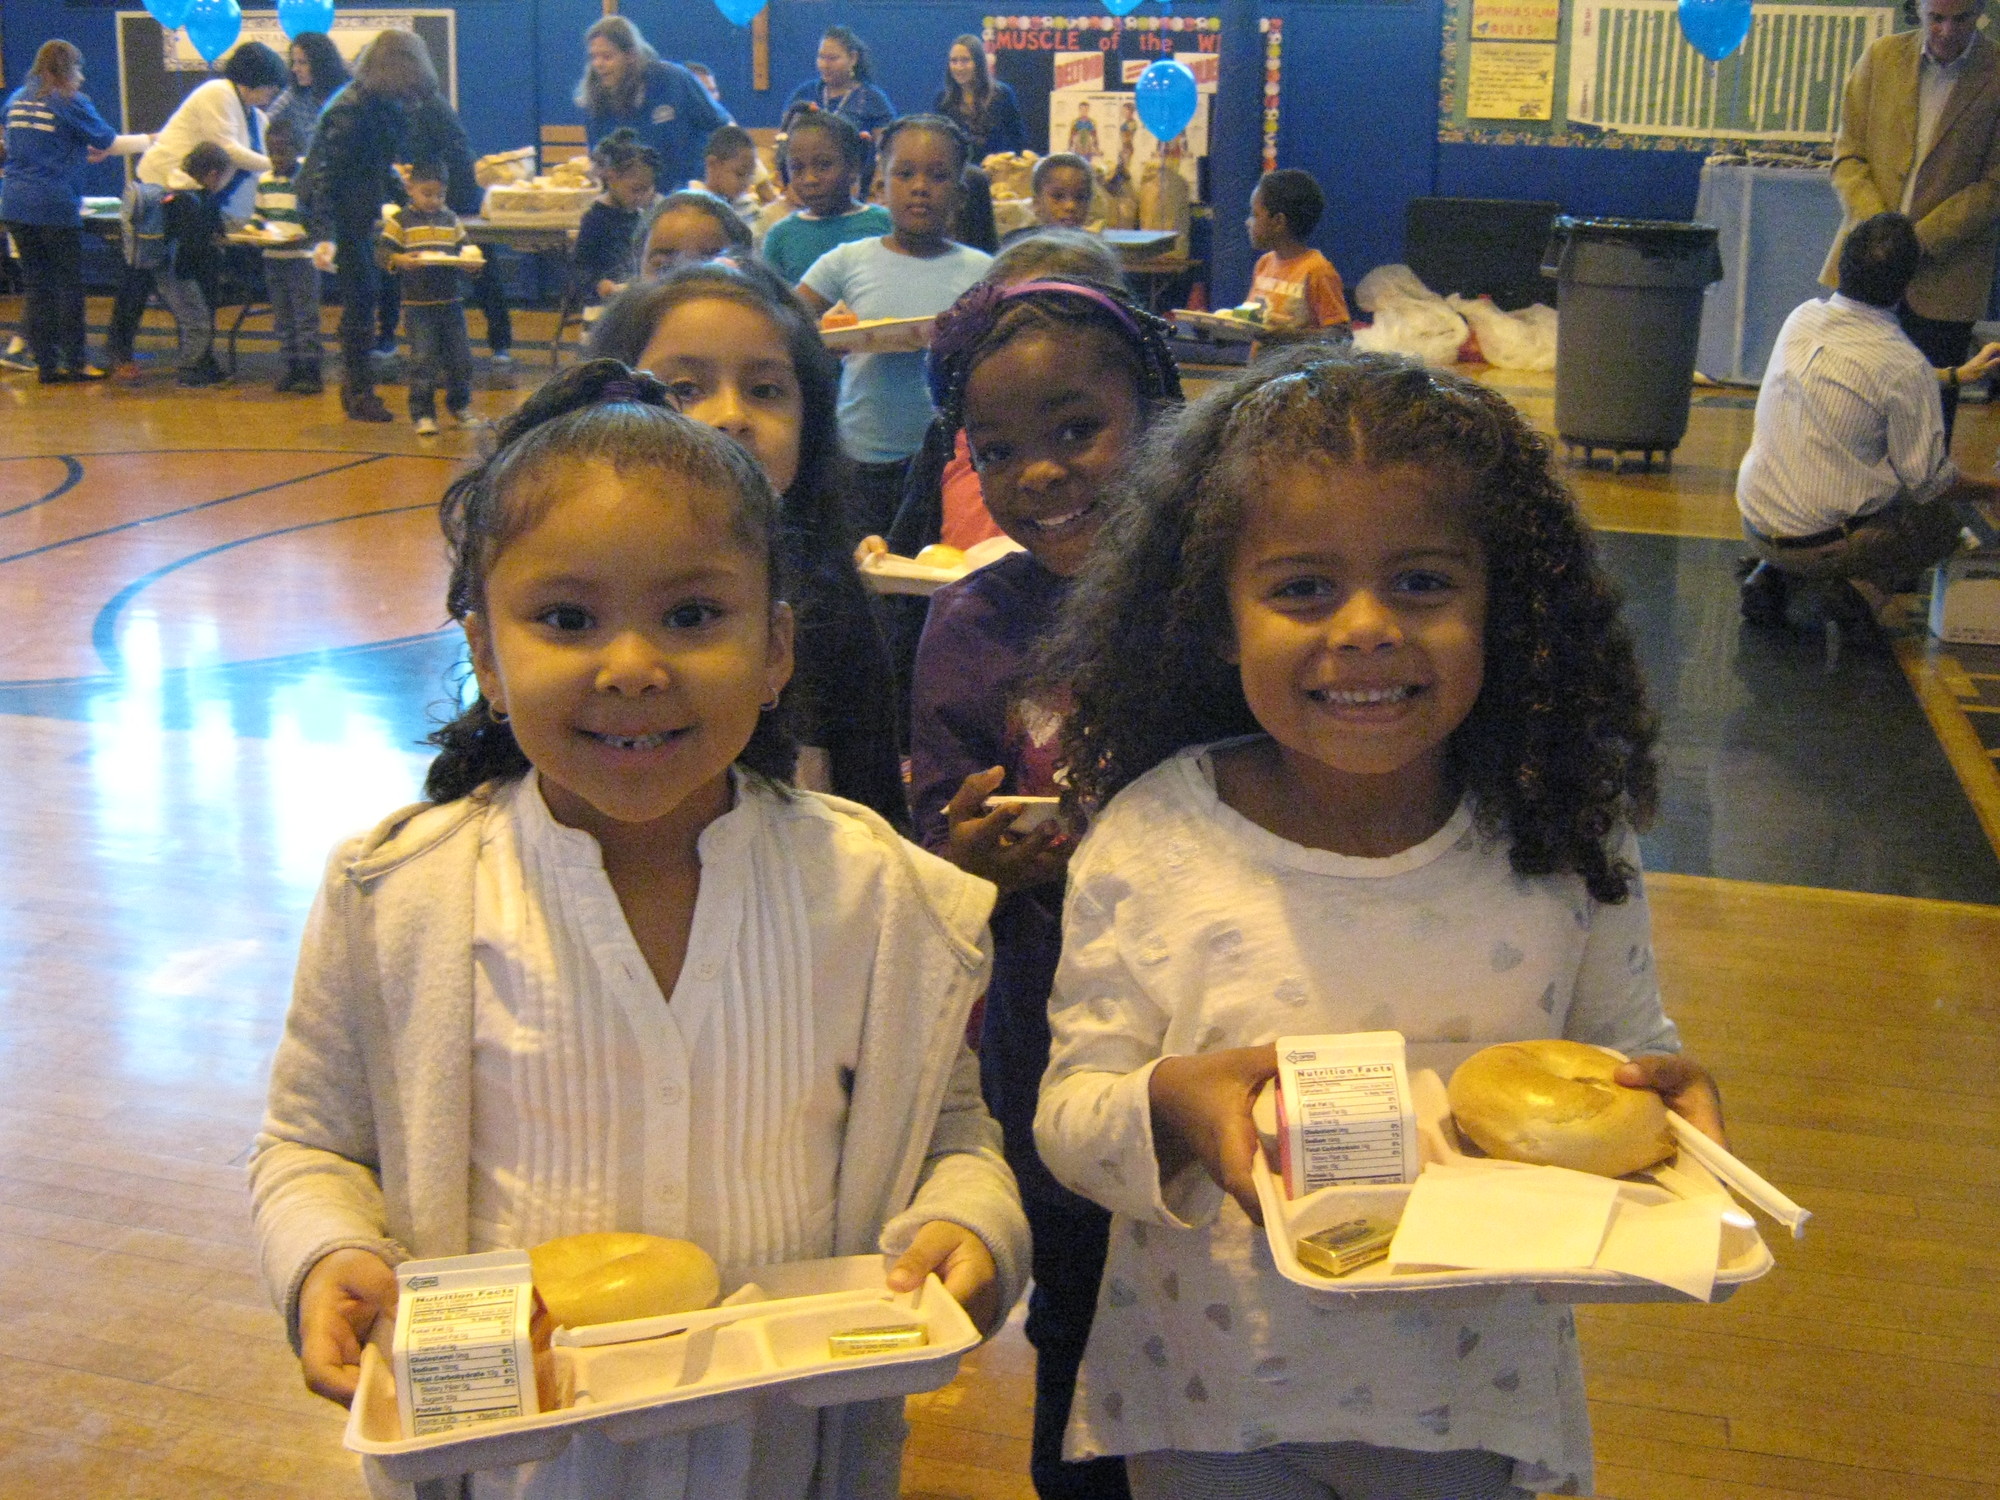 Shaw students enjoyed free bagels provided by the Valley Stream Teachers Association last Friday morning.